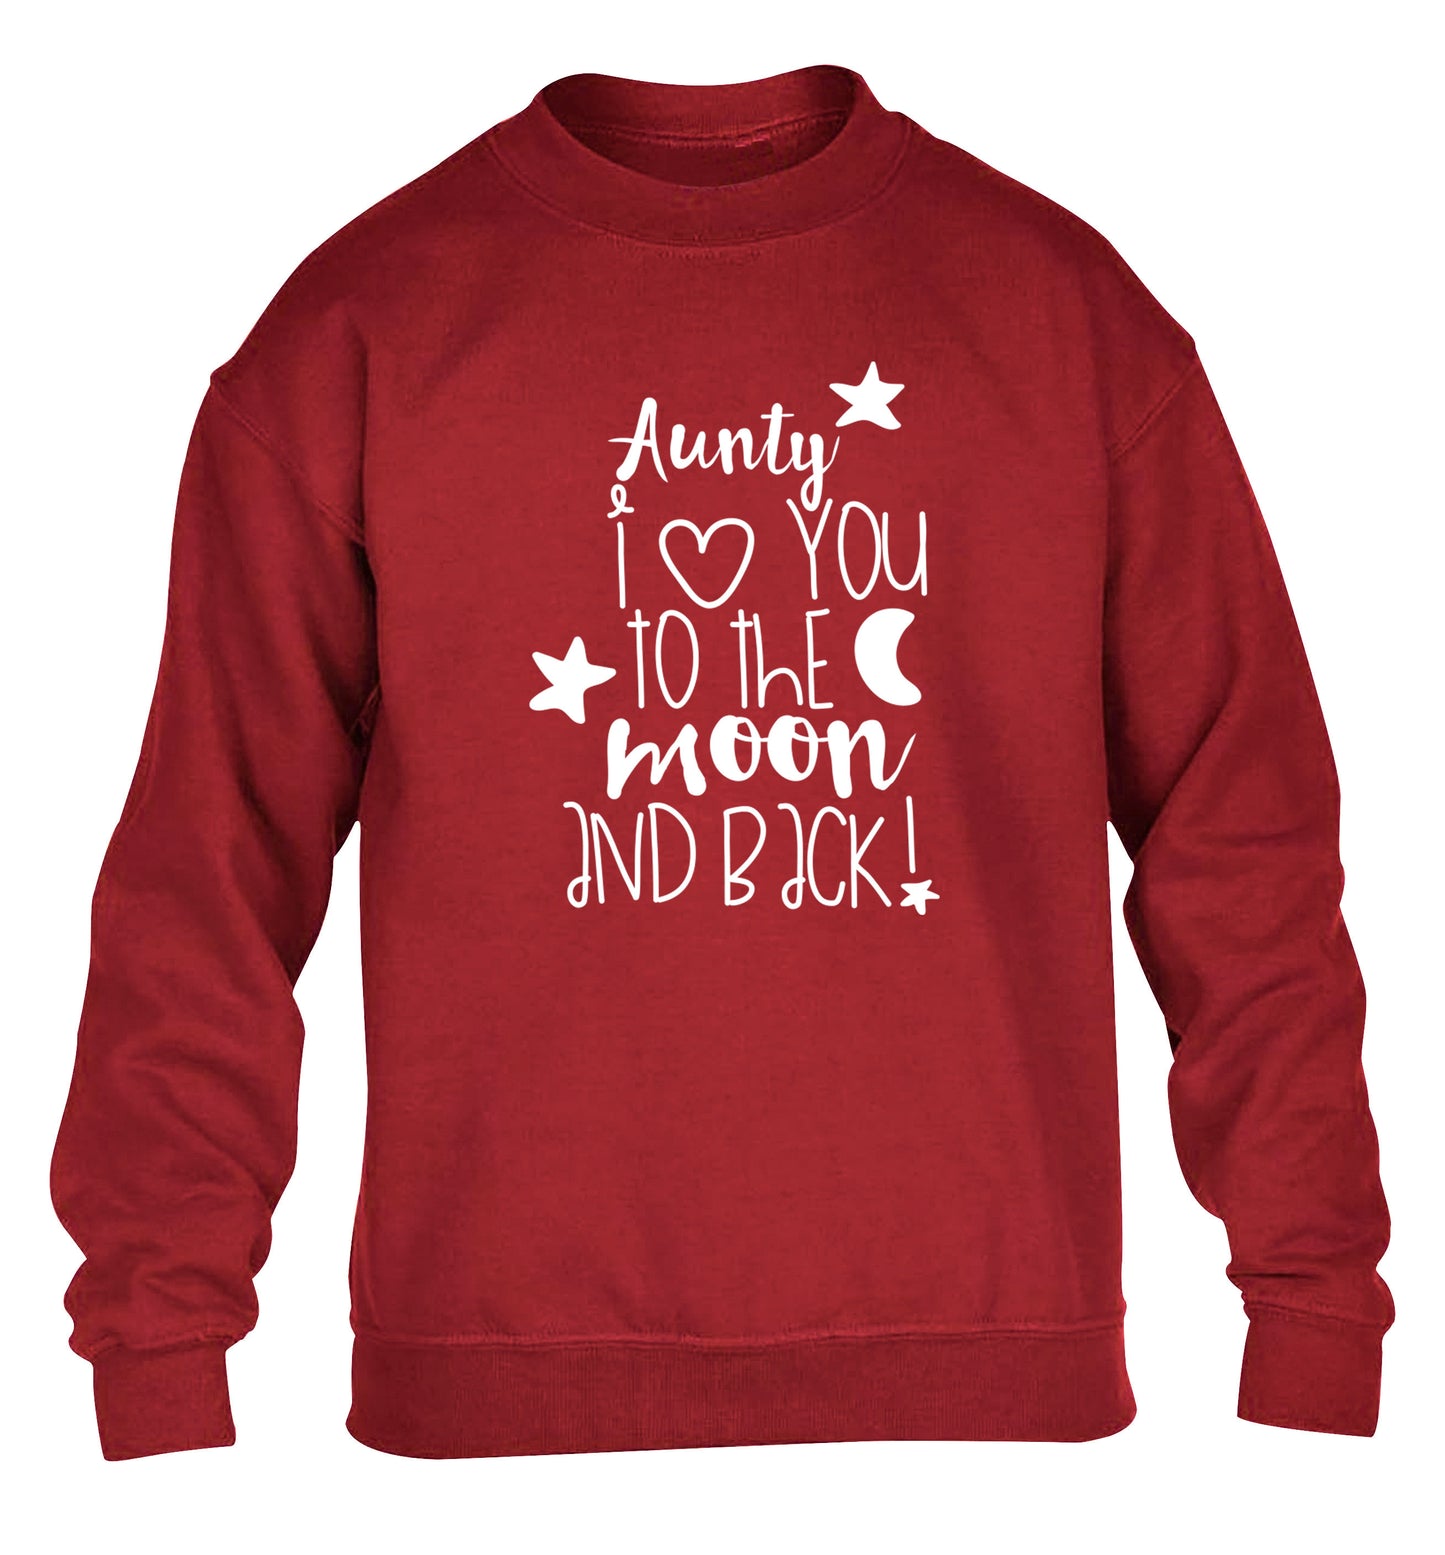 Aunty I love you to the moon and back children's grey  sweater 12-14 Years